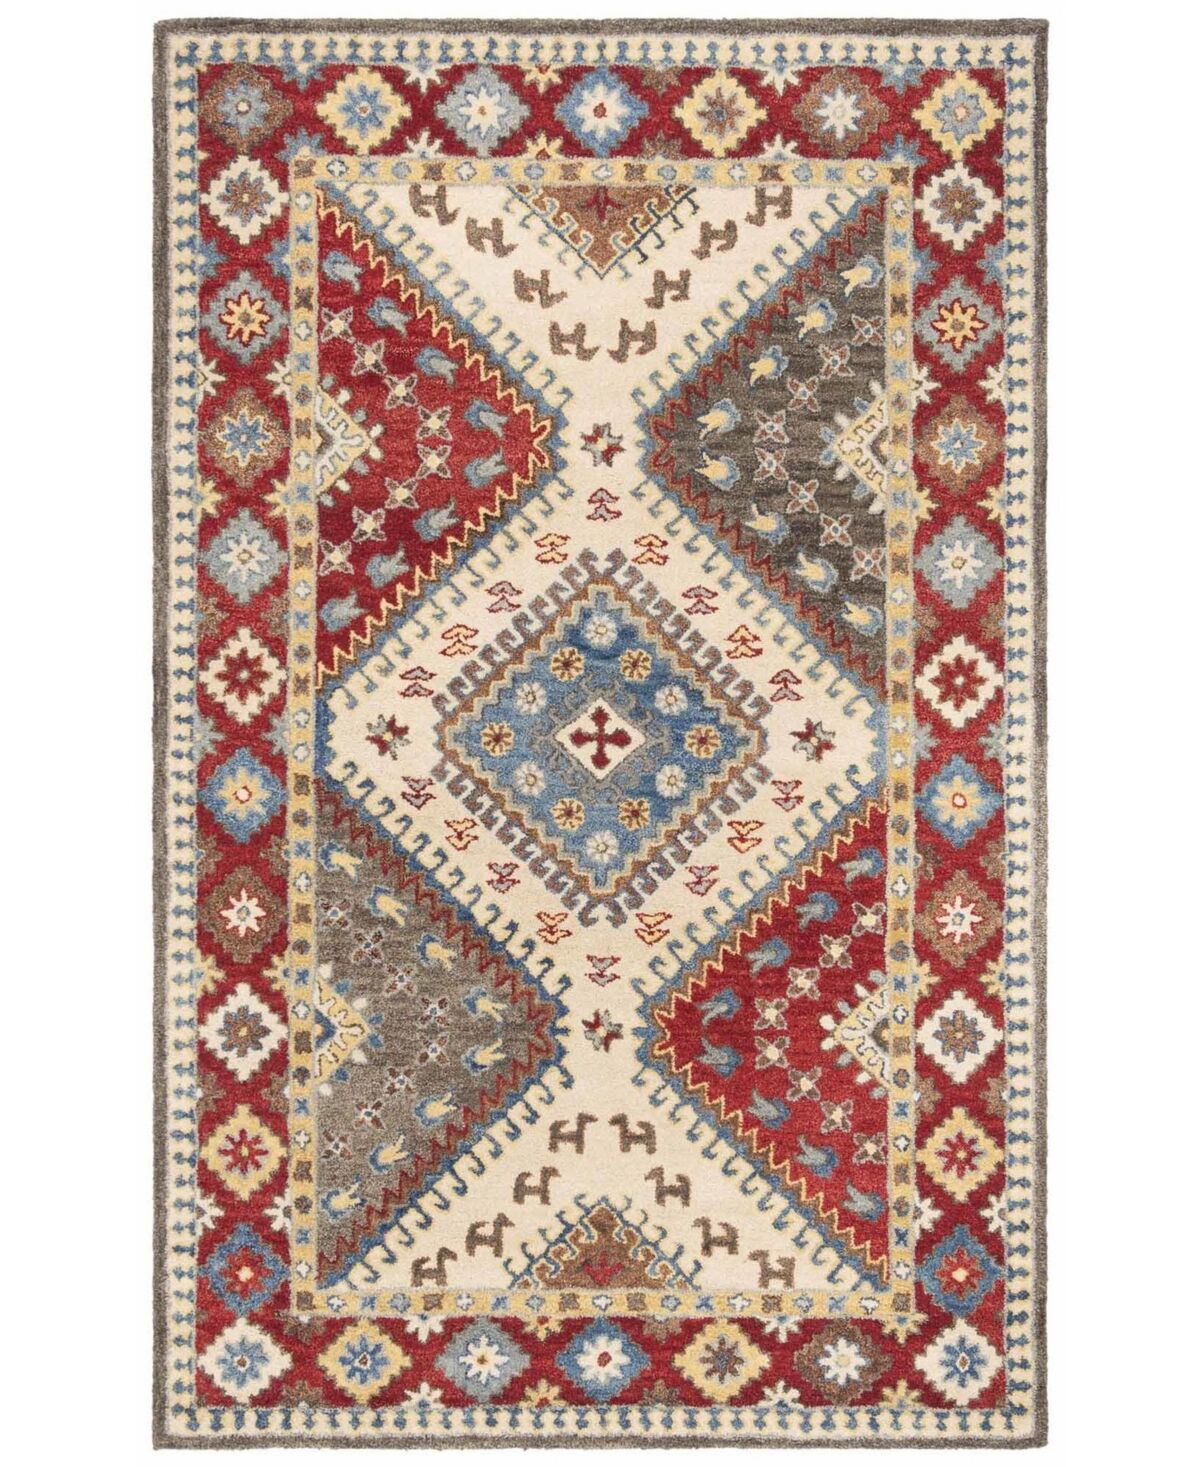 Safavieh Antiquity At507 Red and Ivory 6' x 9' Area Rug - Red